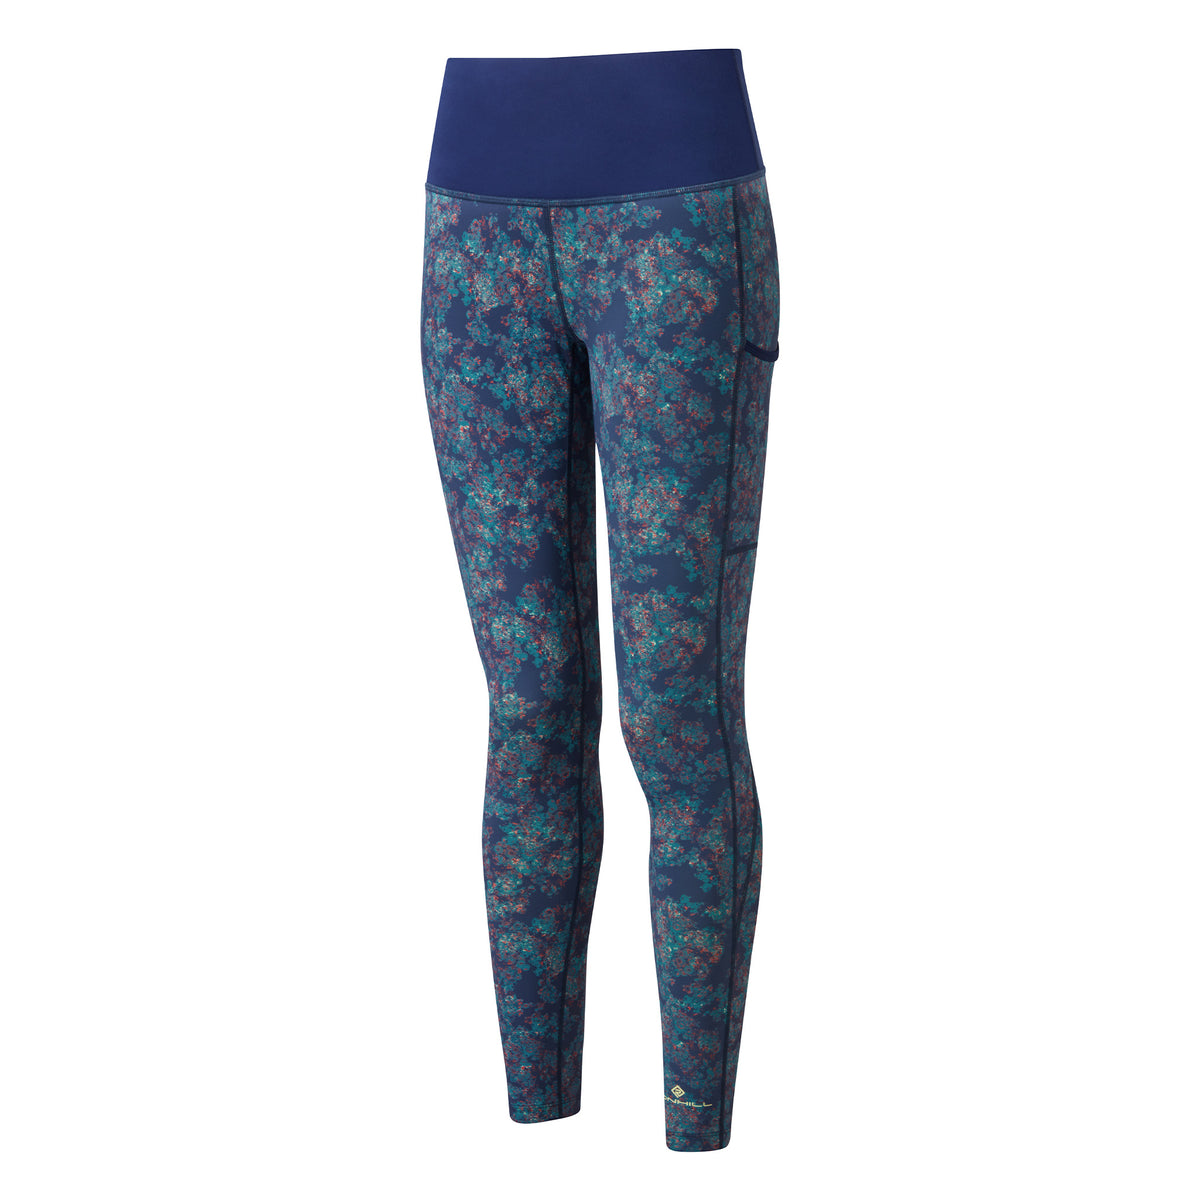 Ronhill Womens Life Tights: Deep Blue/MicroFloral